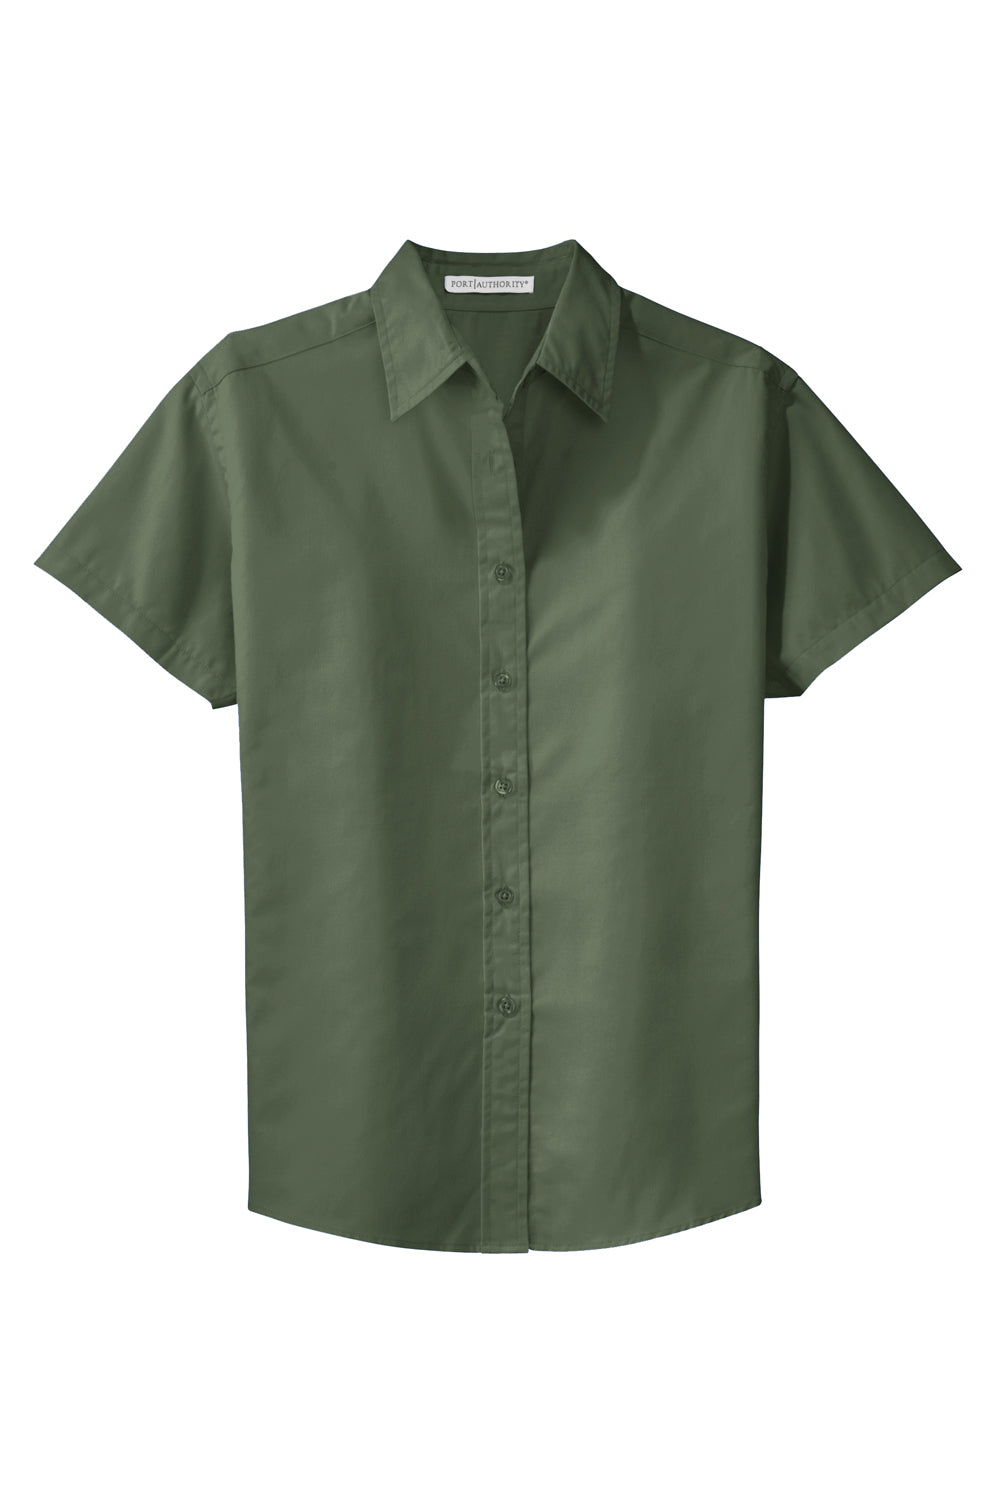 Port Authority L508 Womens Easy Care Wrinkle Resistant Short Sleeve Button Down Shirt Clover Green Flat Front